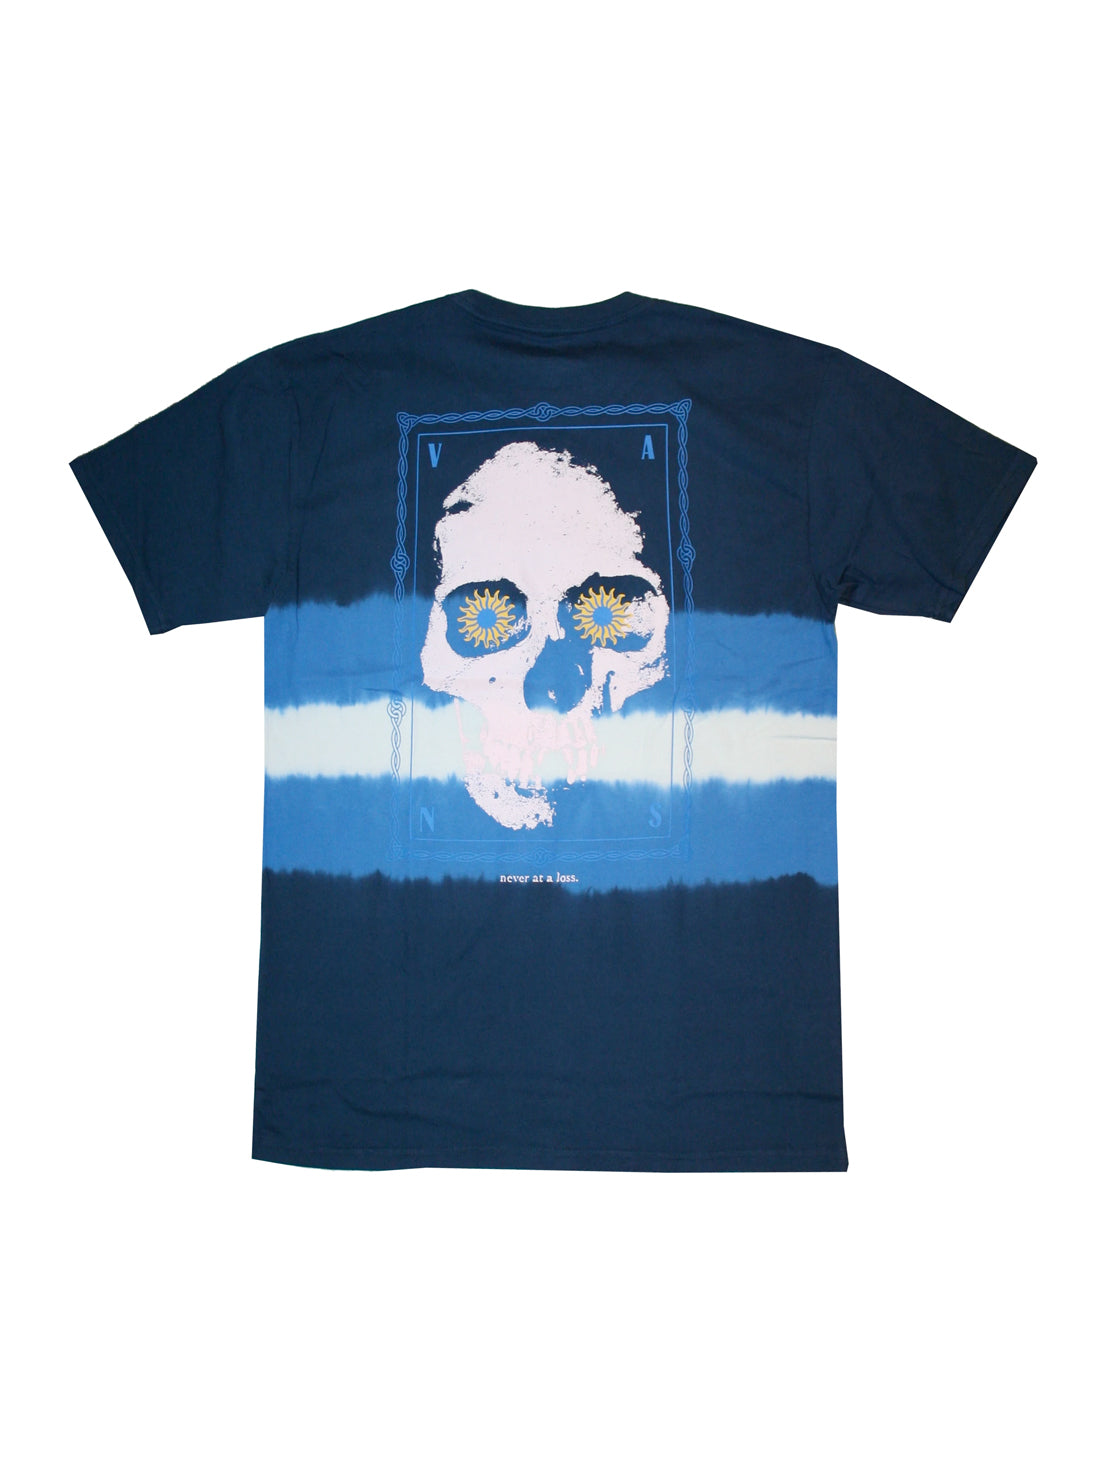 Funeral March S/S Tee Shirt Vic/Blu (size options listed)